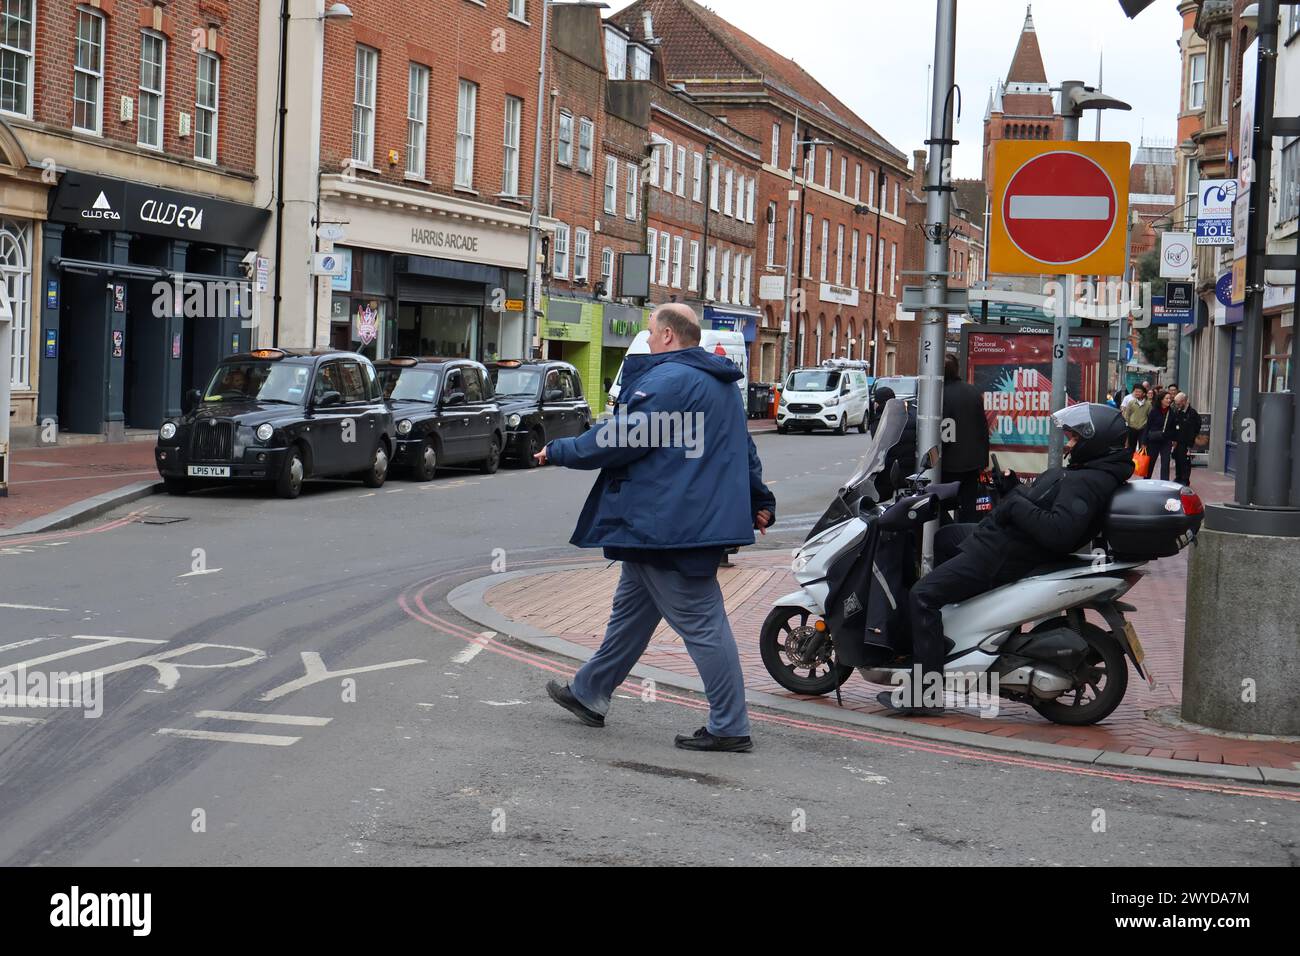 Pedestrian walking across the road at the taxi rank as a delivery rider lays back relaxing on his motorcycle scooter. Stock Photo